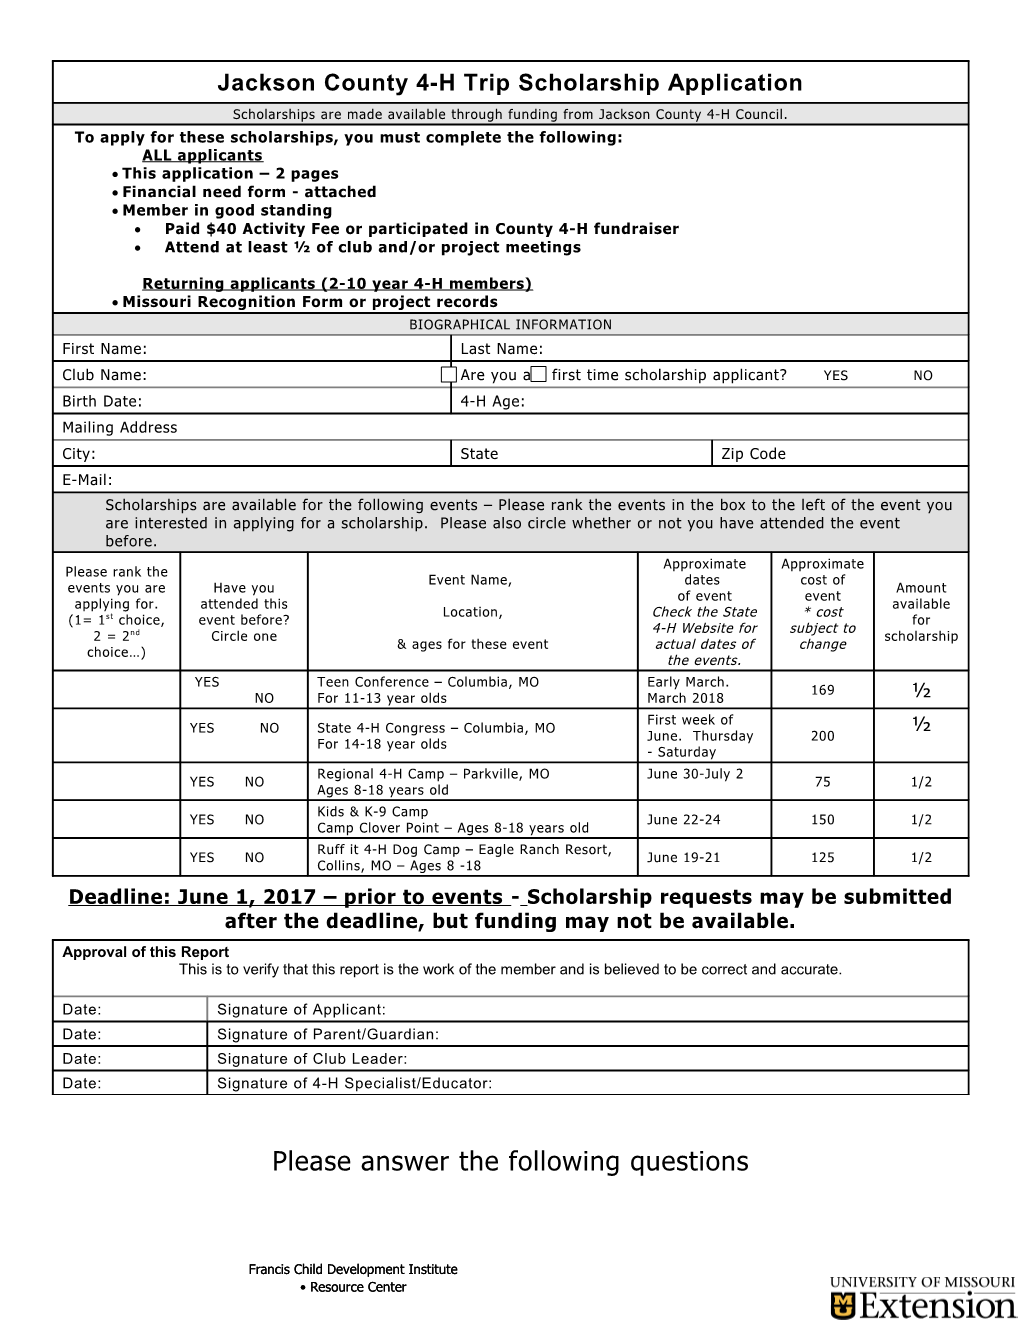 Financial Need Form - Attached